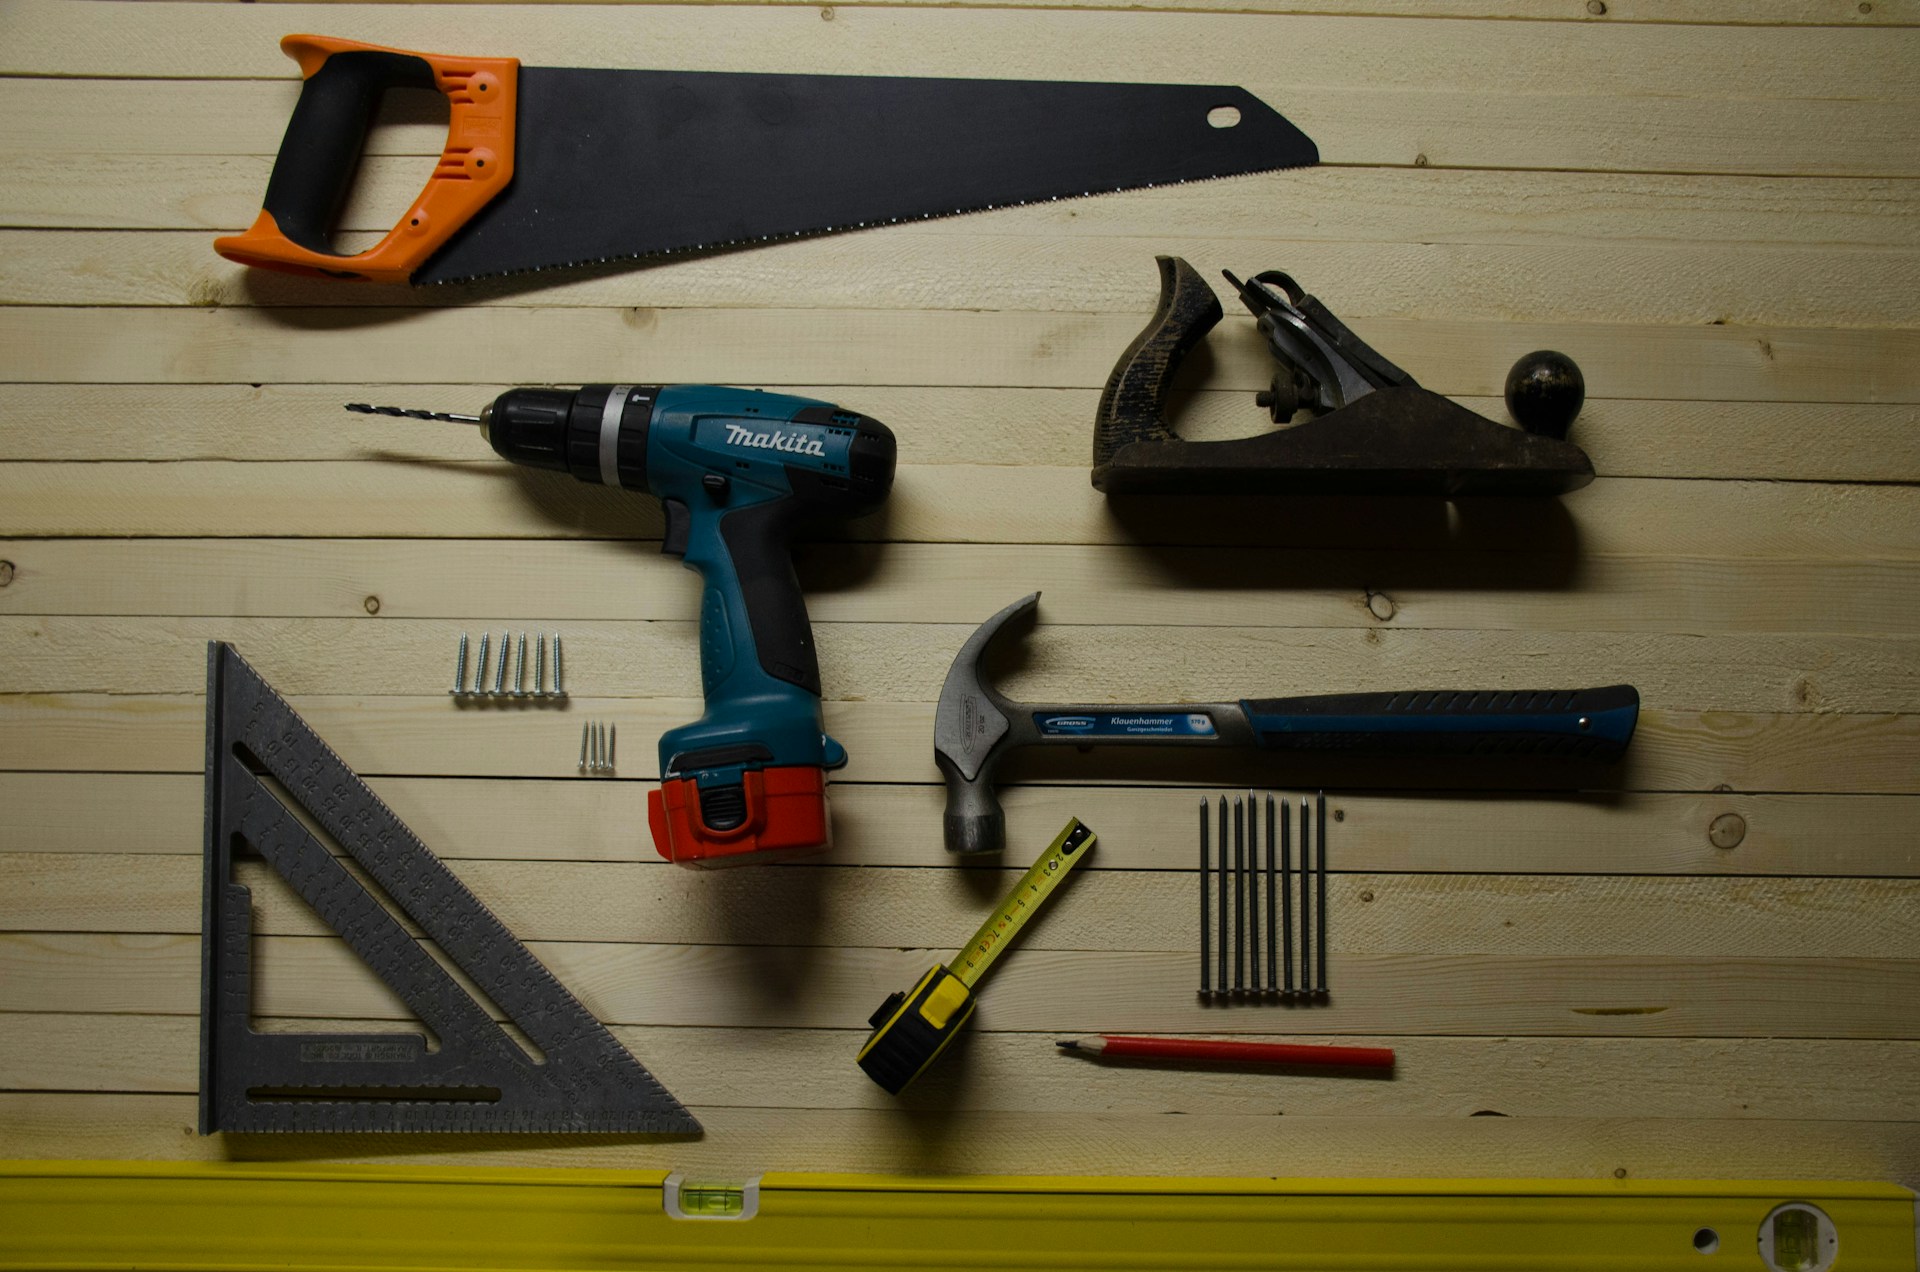 Essential Tools for DIY Home Improvement Projects - WorthvieW